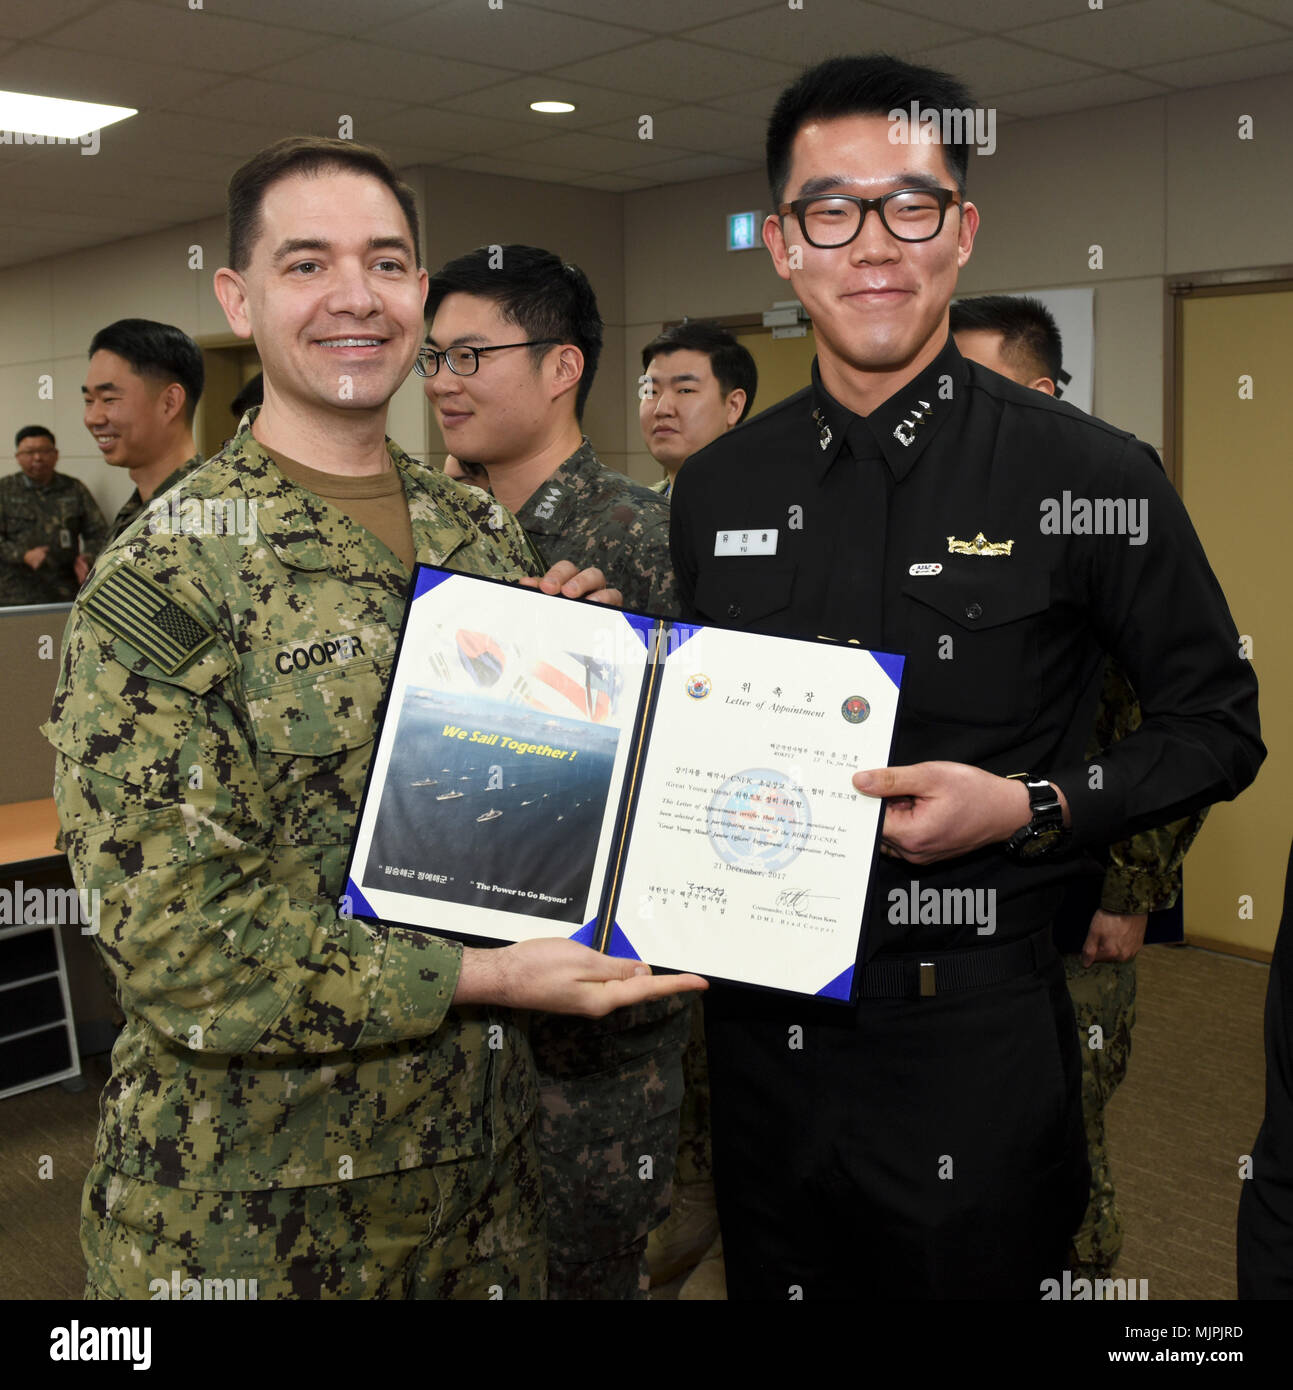 171221-N-TB148-047 BUSAN, Republic of Korea (Dec. 21, 2017) Rear Adm. Brad Cooper, commander, U.S. Naval Forces Korea (CNFK), presents Lt. Yu, Jin Hong with a letter of appointment for his selection to the 'Great Young Minds' Junior Officers' Engagement and Cooperation Program. The 'Great Young Minds' initiative brings together hand-selected, young officers from the ROK and U.S. navies and challenges them to develop innovative solutions to further enhance the ROK -U.S. alliance of the future. (U.S. Navy photo by Mass Communication Specialist Seaman William Carlisle) Stock Photo